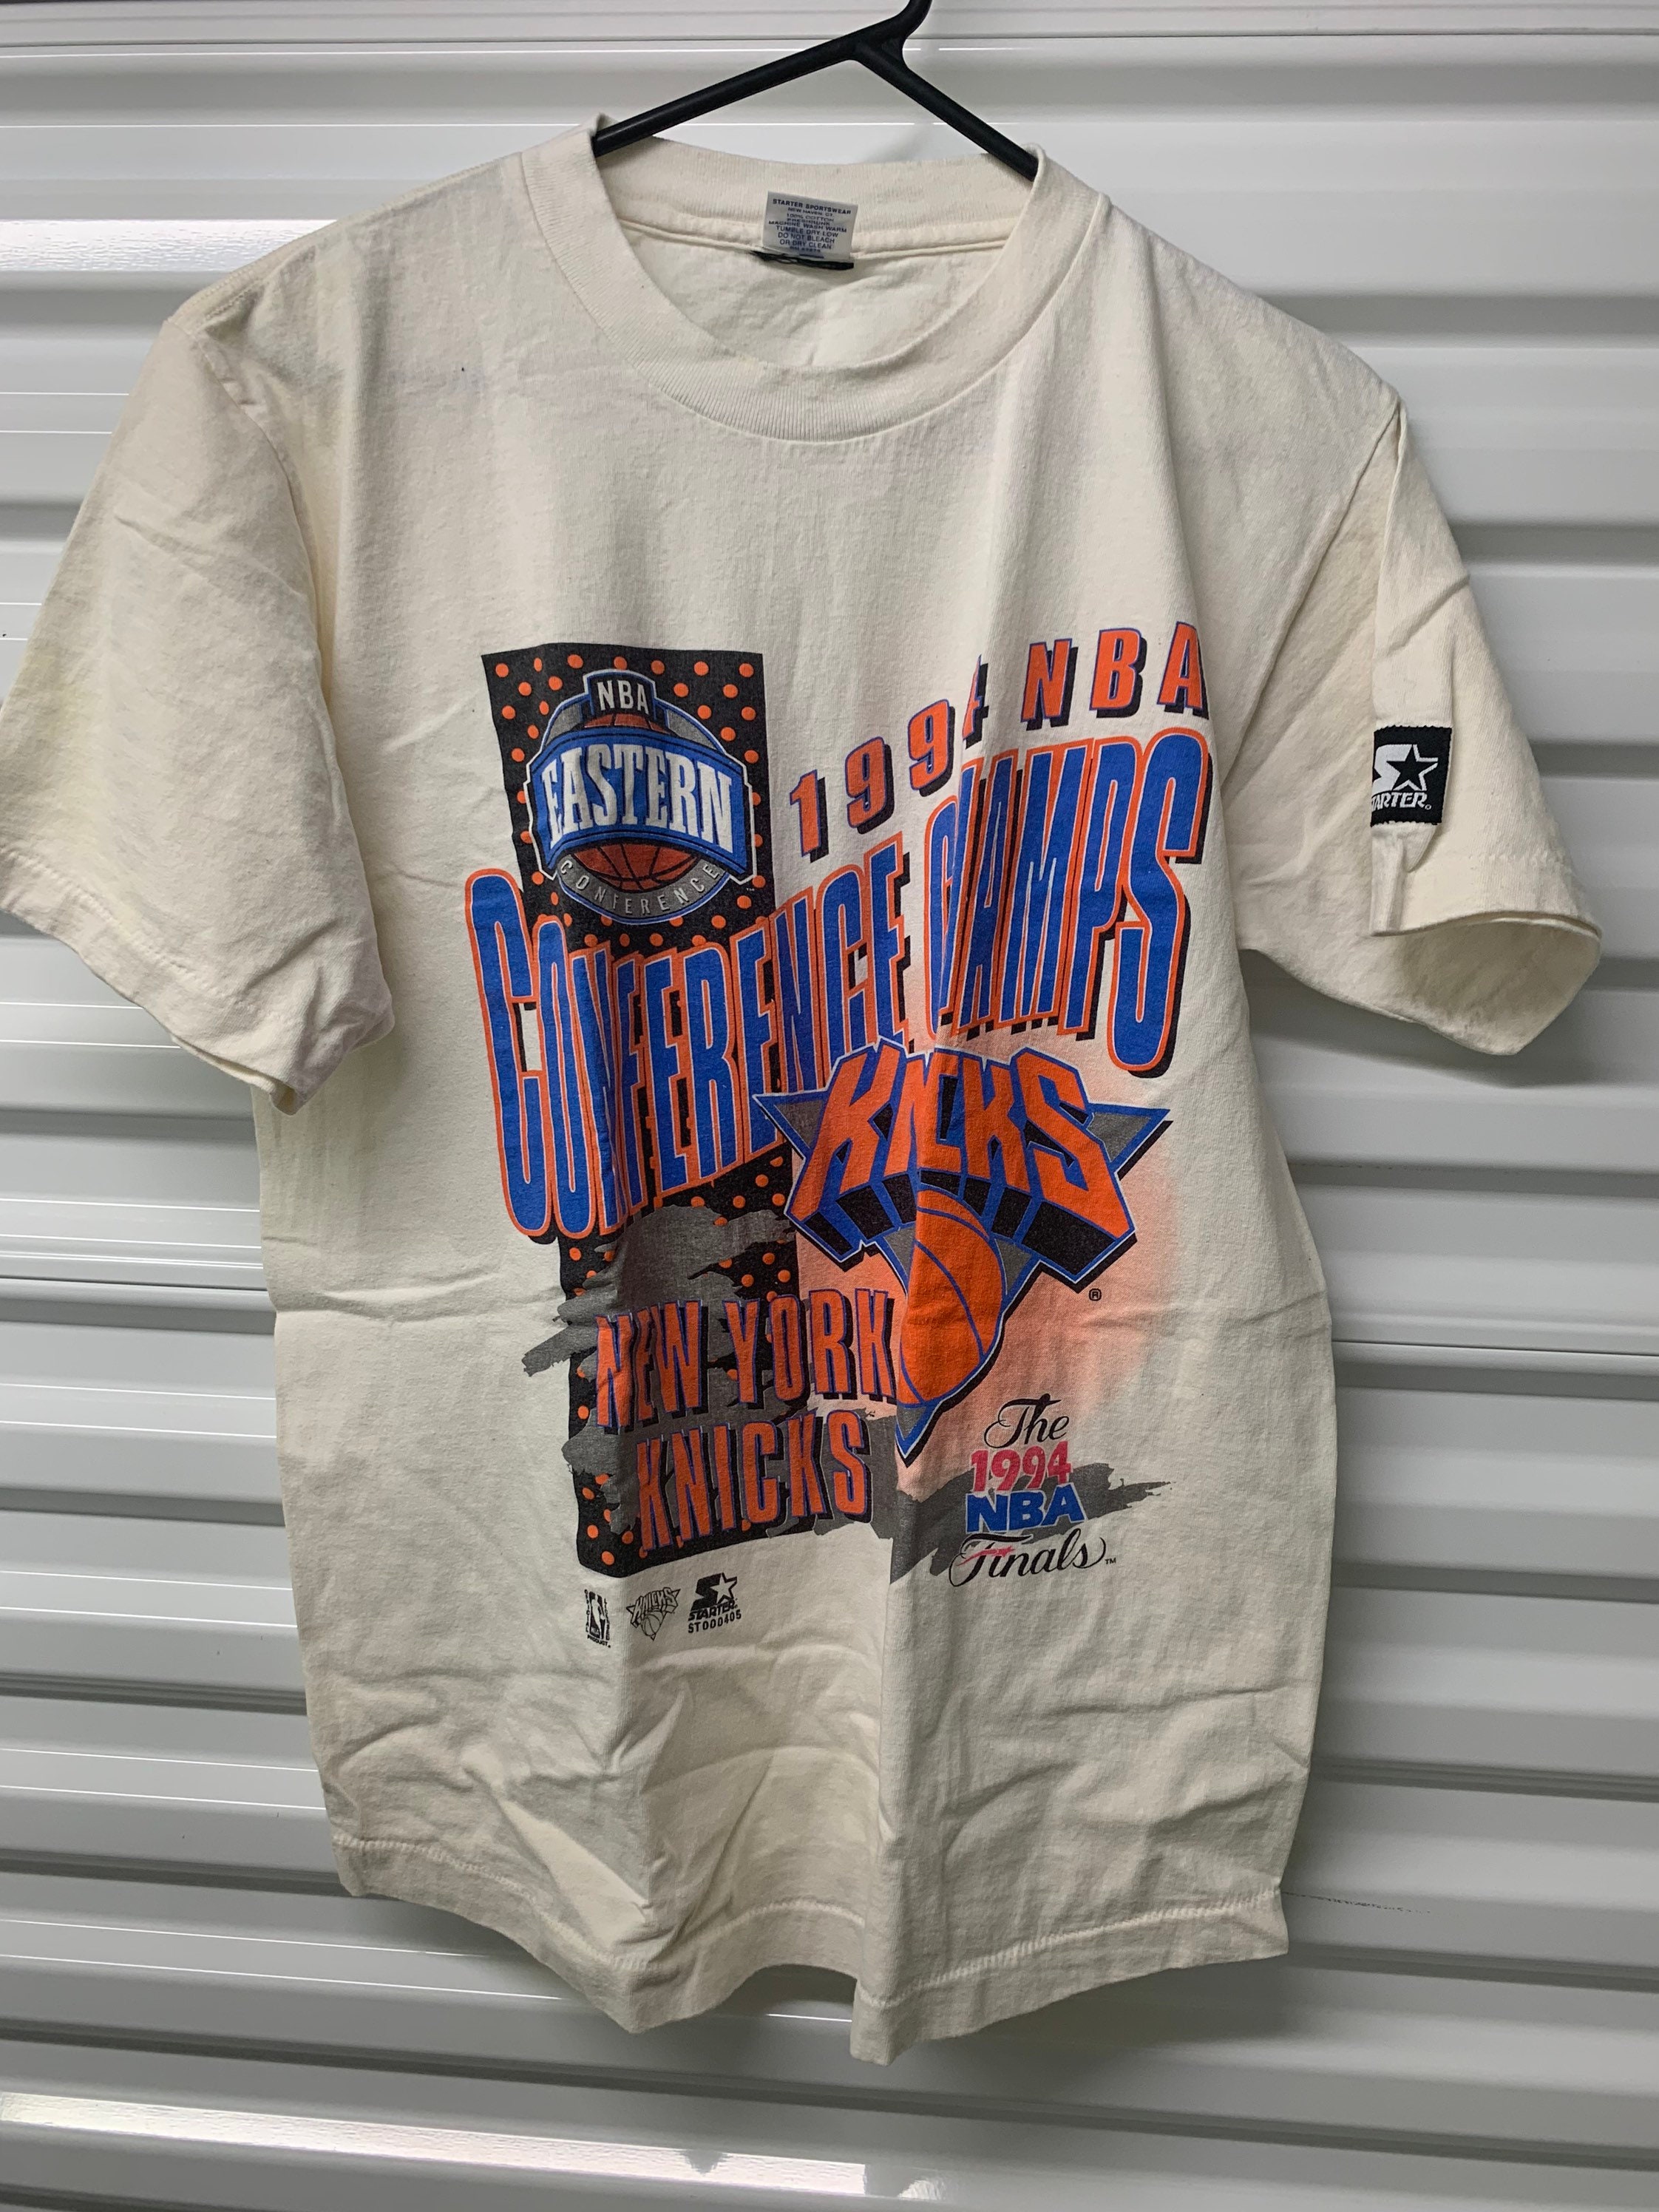 Rare Vintage Houston Rockets 1994 Championship made in the USA shirt